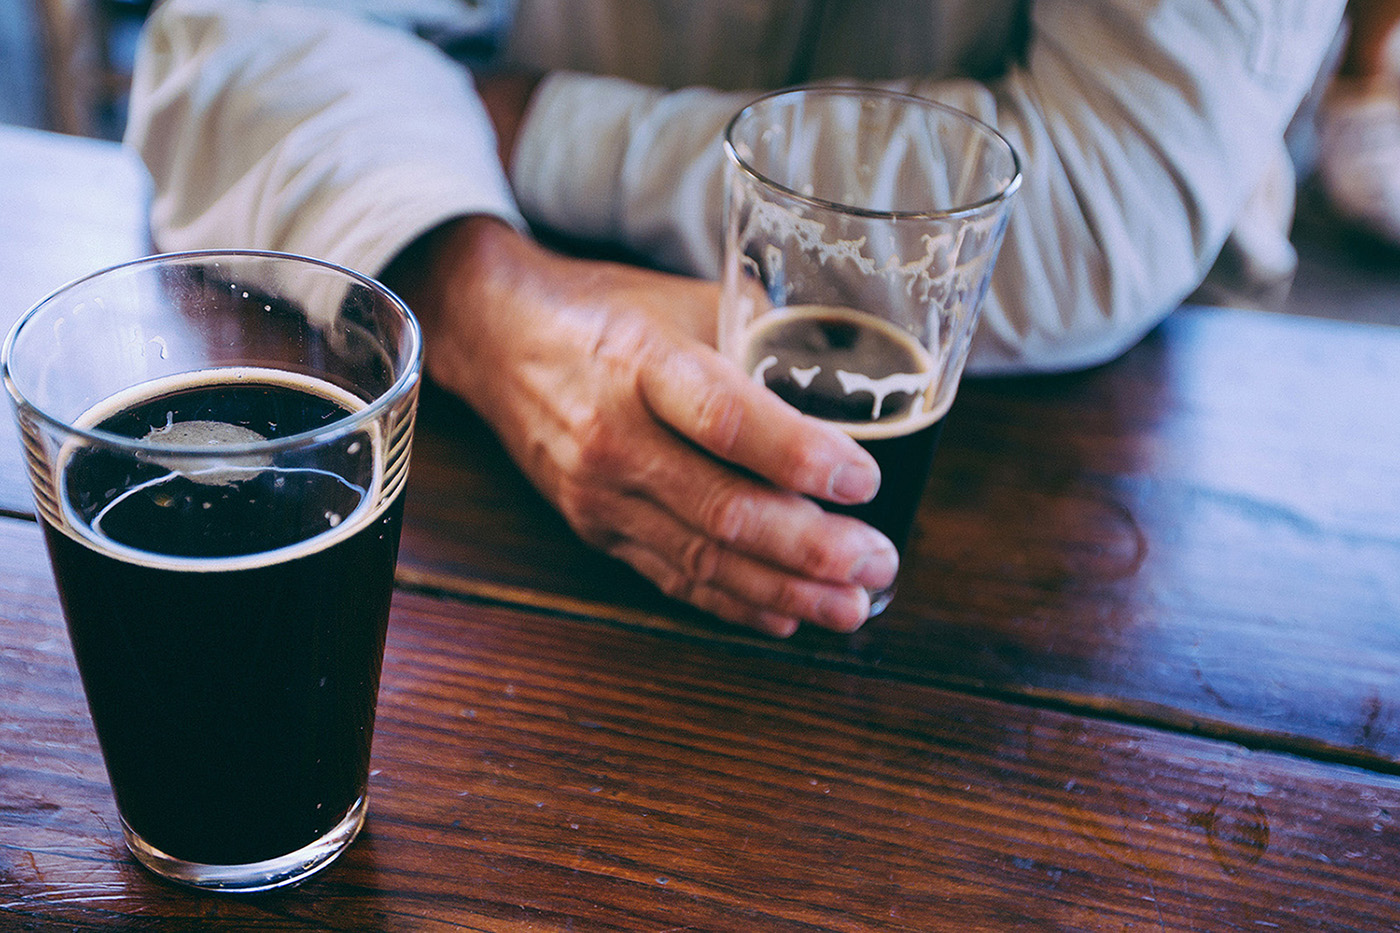 New Study Says Even Light Drinking Can Harm Your Brain